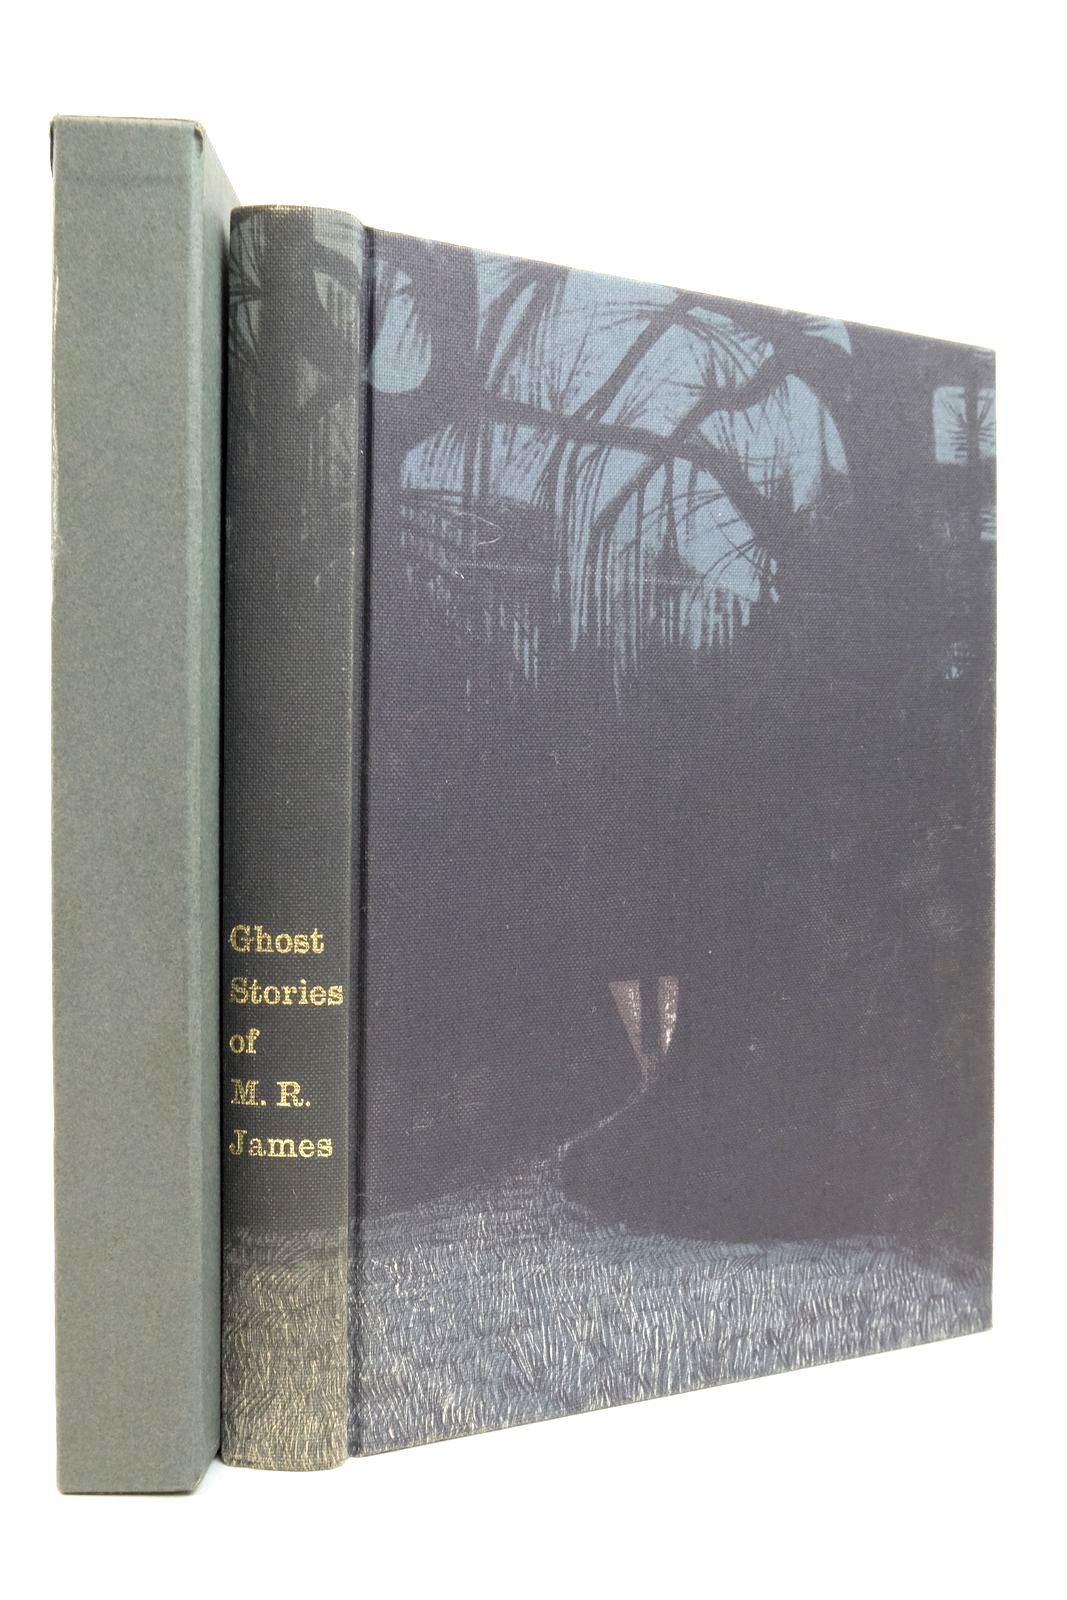 Photo of GHOST STORIES OF M.R. JAMES- Stock Number: 2138356